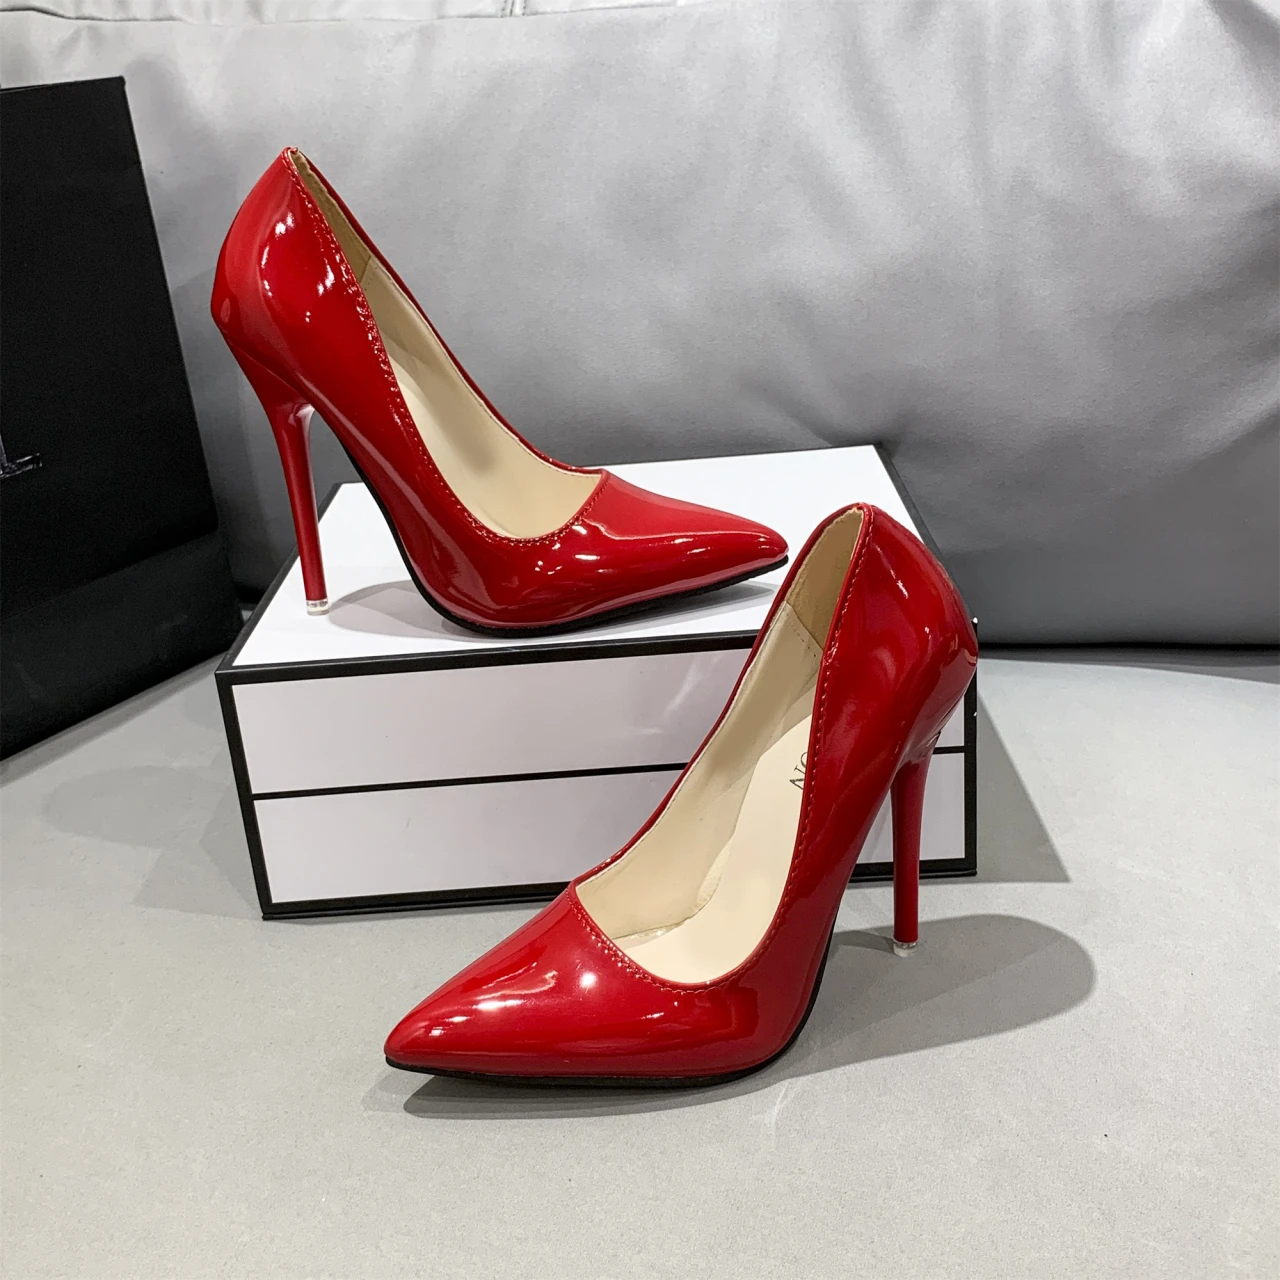 Women Shoes Red Sole High Heels Sexy Pointed Toe Red Sole 12cm Pumps  Wedding Dress Shoes Nude Black Color Red Bottom High Heels - Pumps -  AliExpress